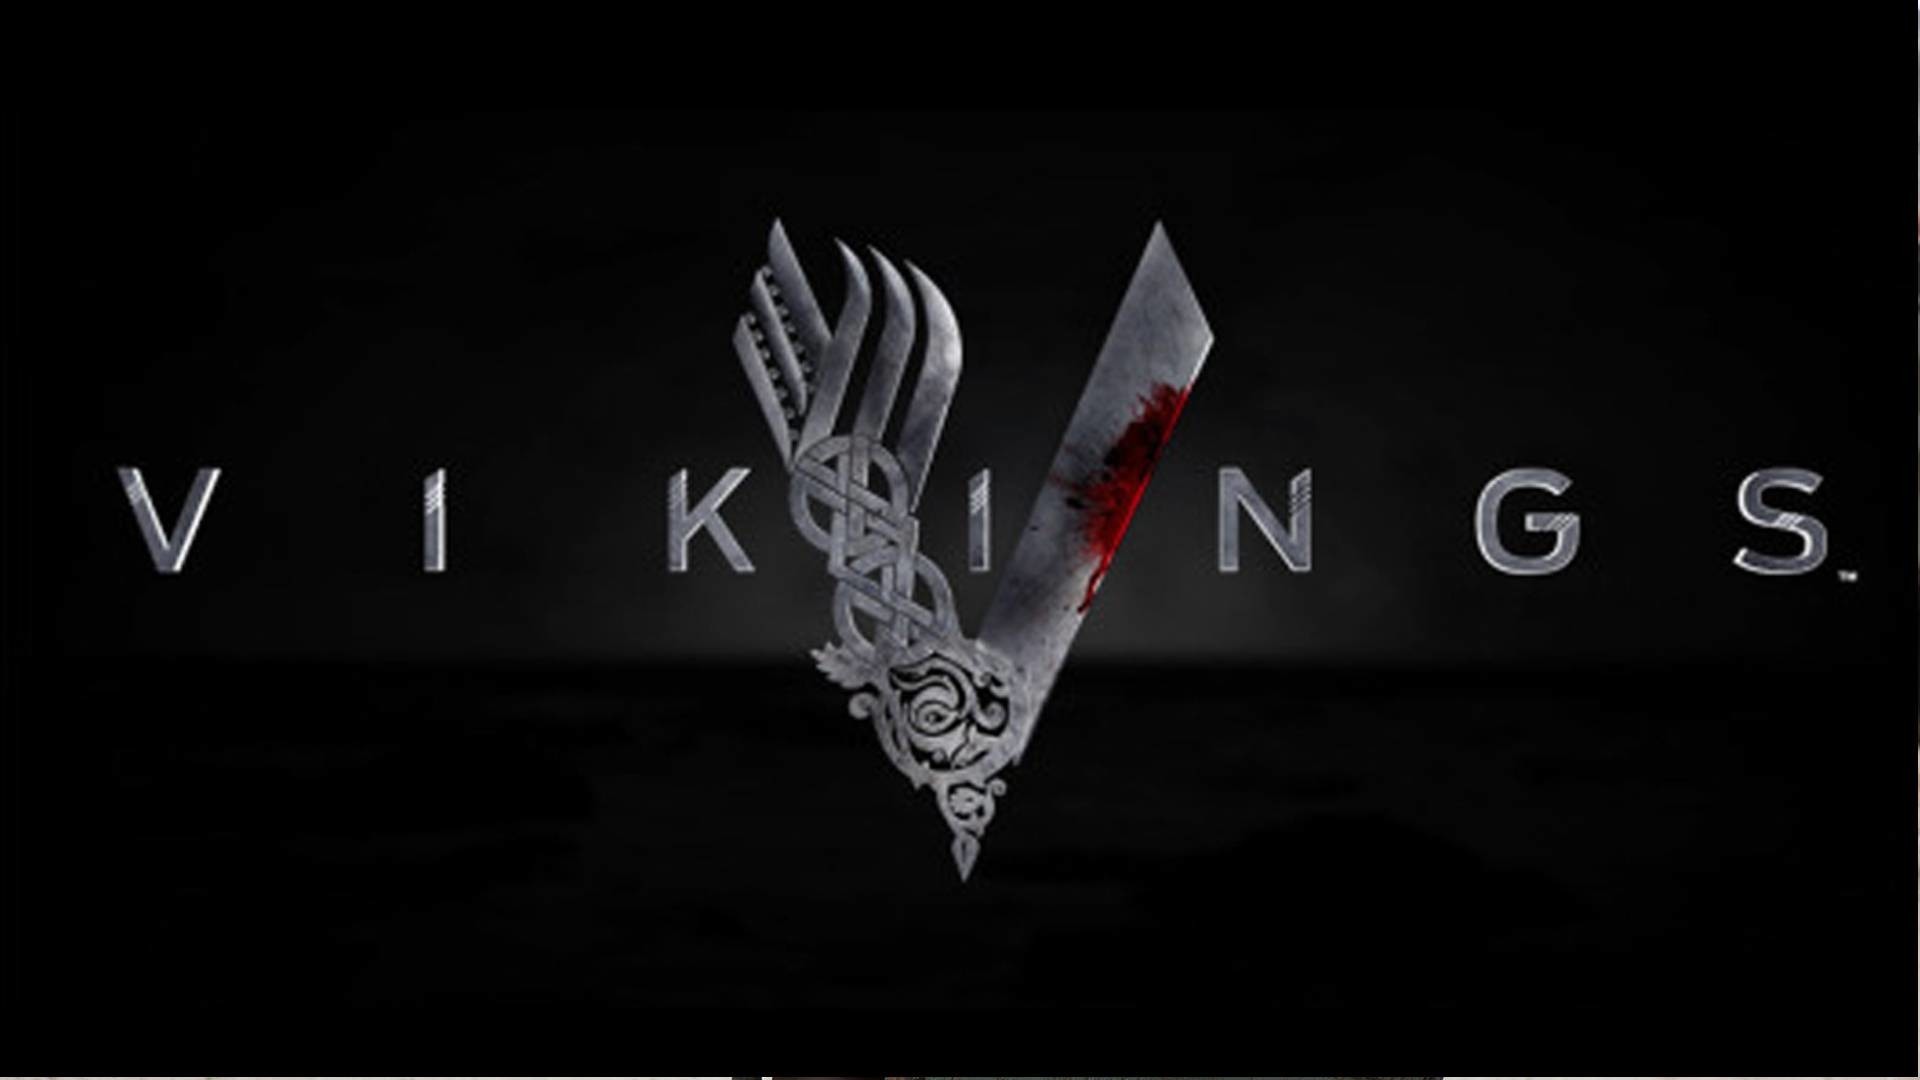 1920x1080  HQFX Viking Wallpapers, High Quality, Wallpapers and Pictures  BackGrounds Collection – download for free